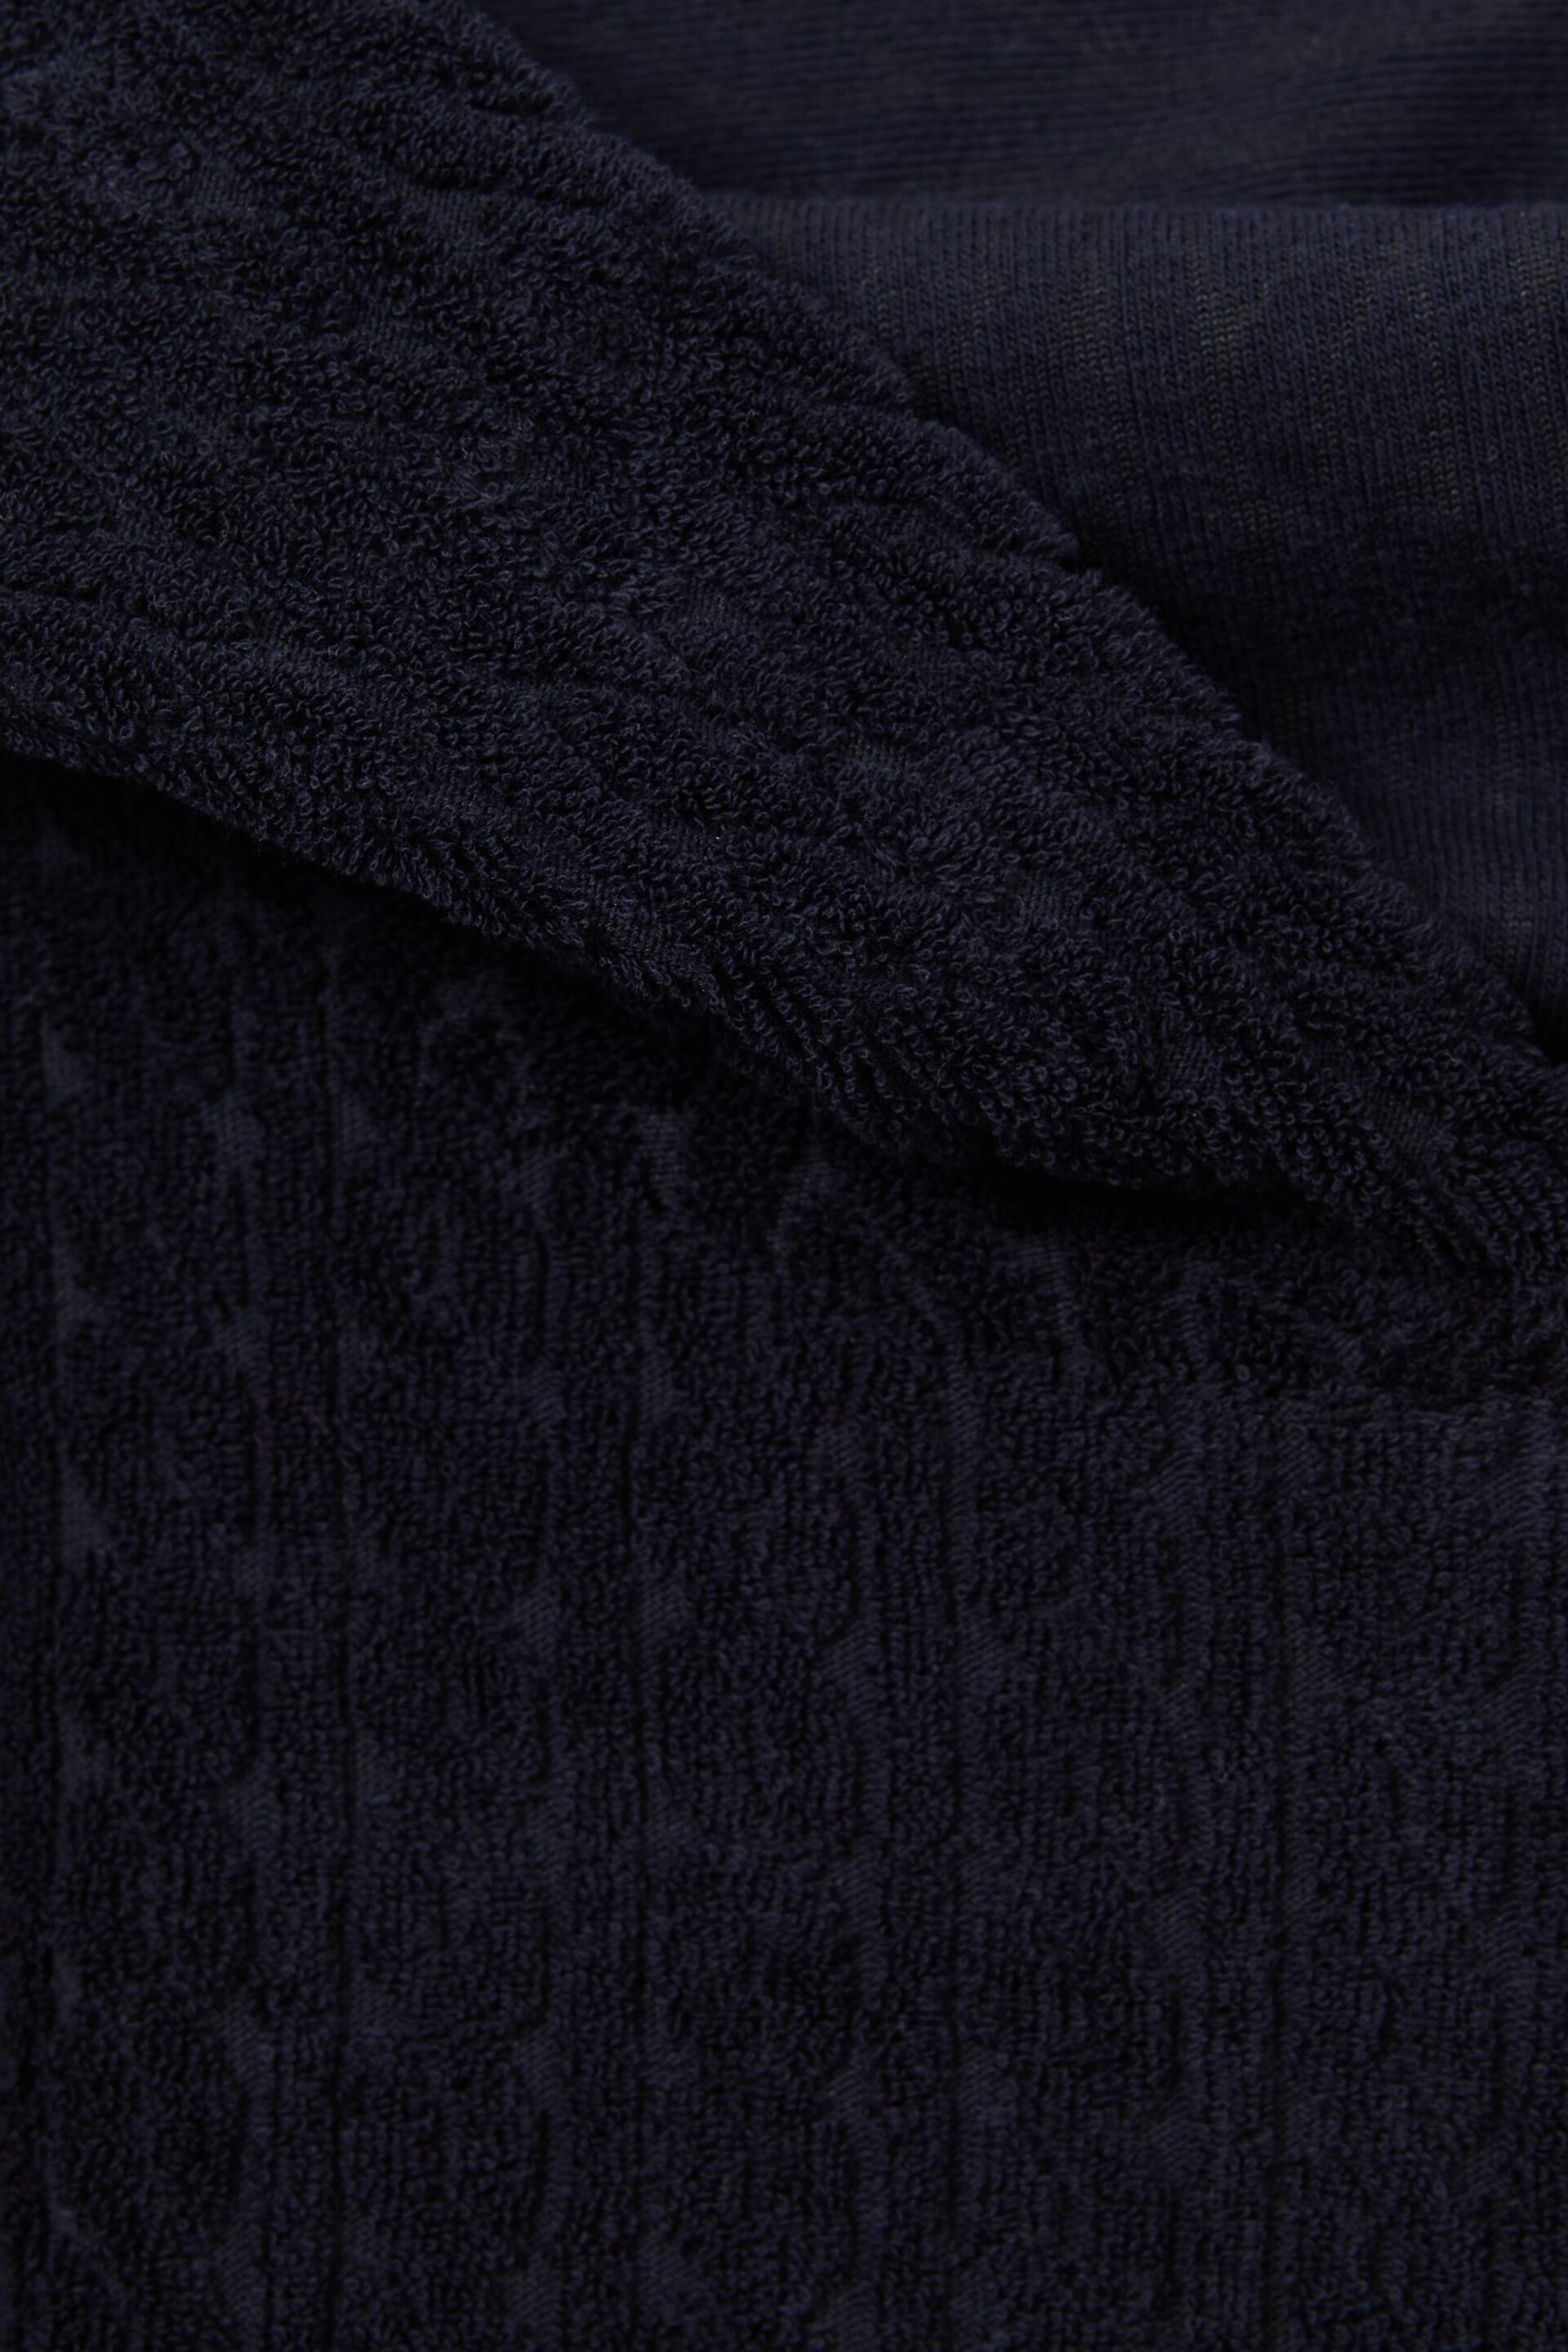 Reiss Navy Shine Textured Towelling Hooded Poncho - Image 4 of 4